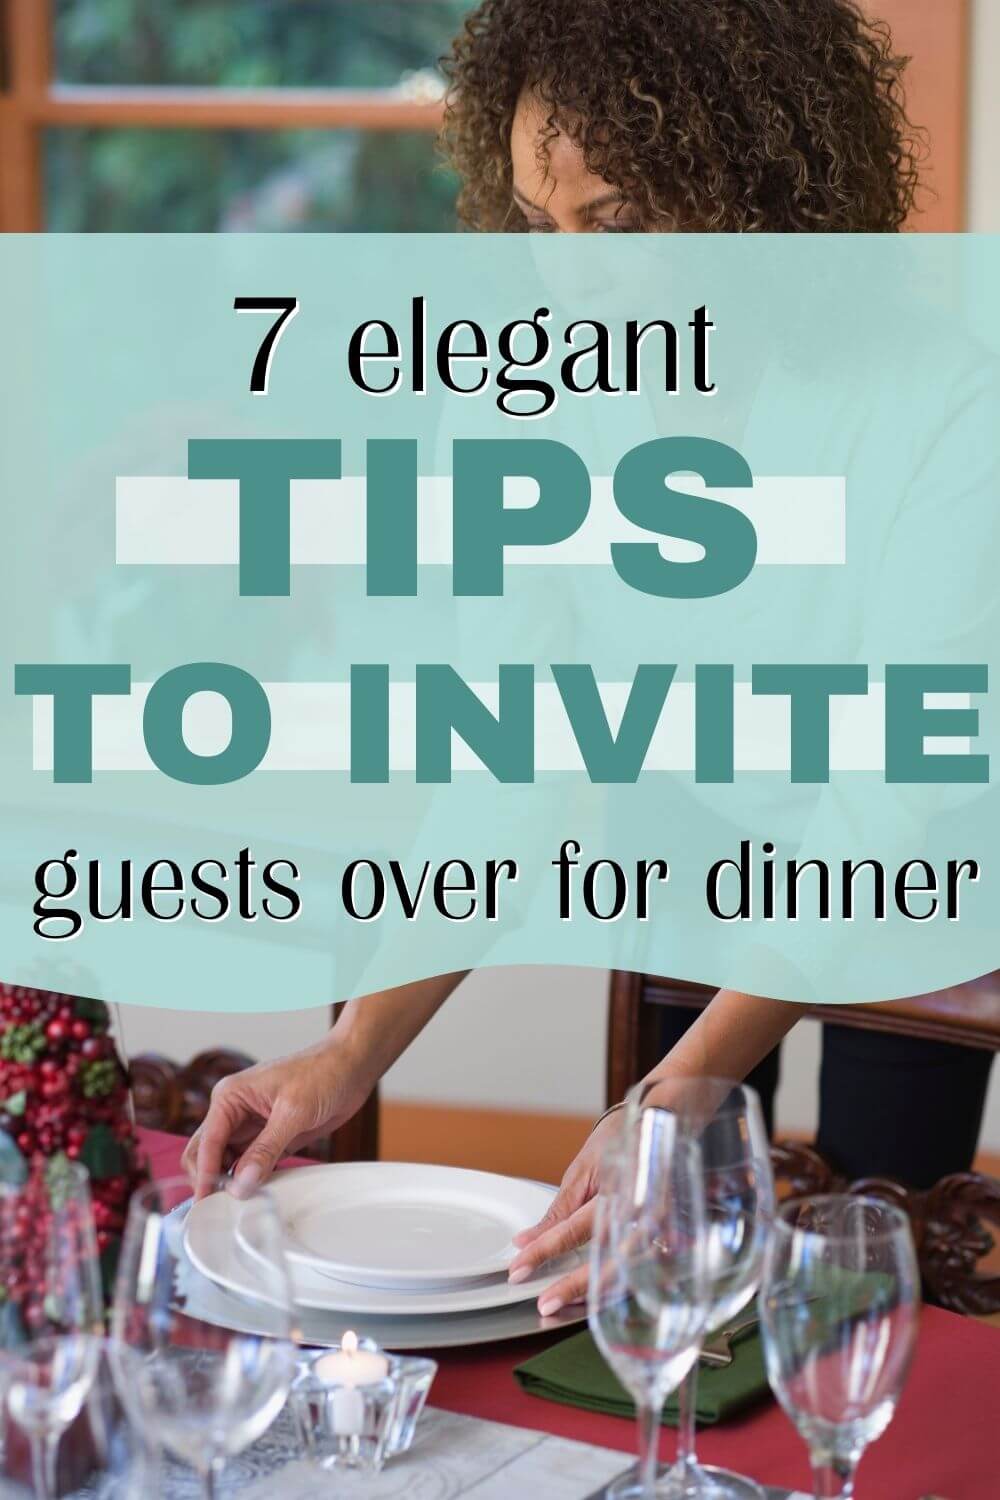 7 Elegant Tips to Invite Guests over for dinner